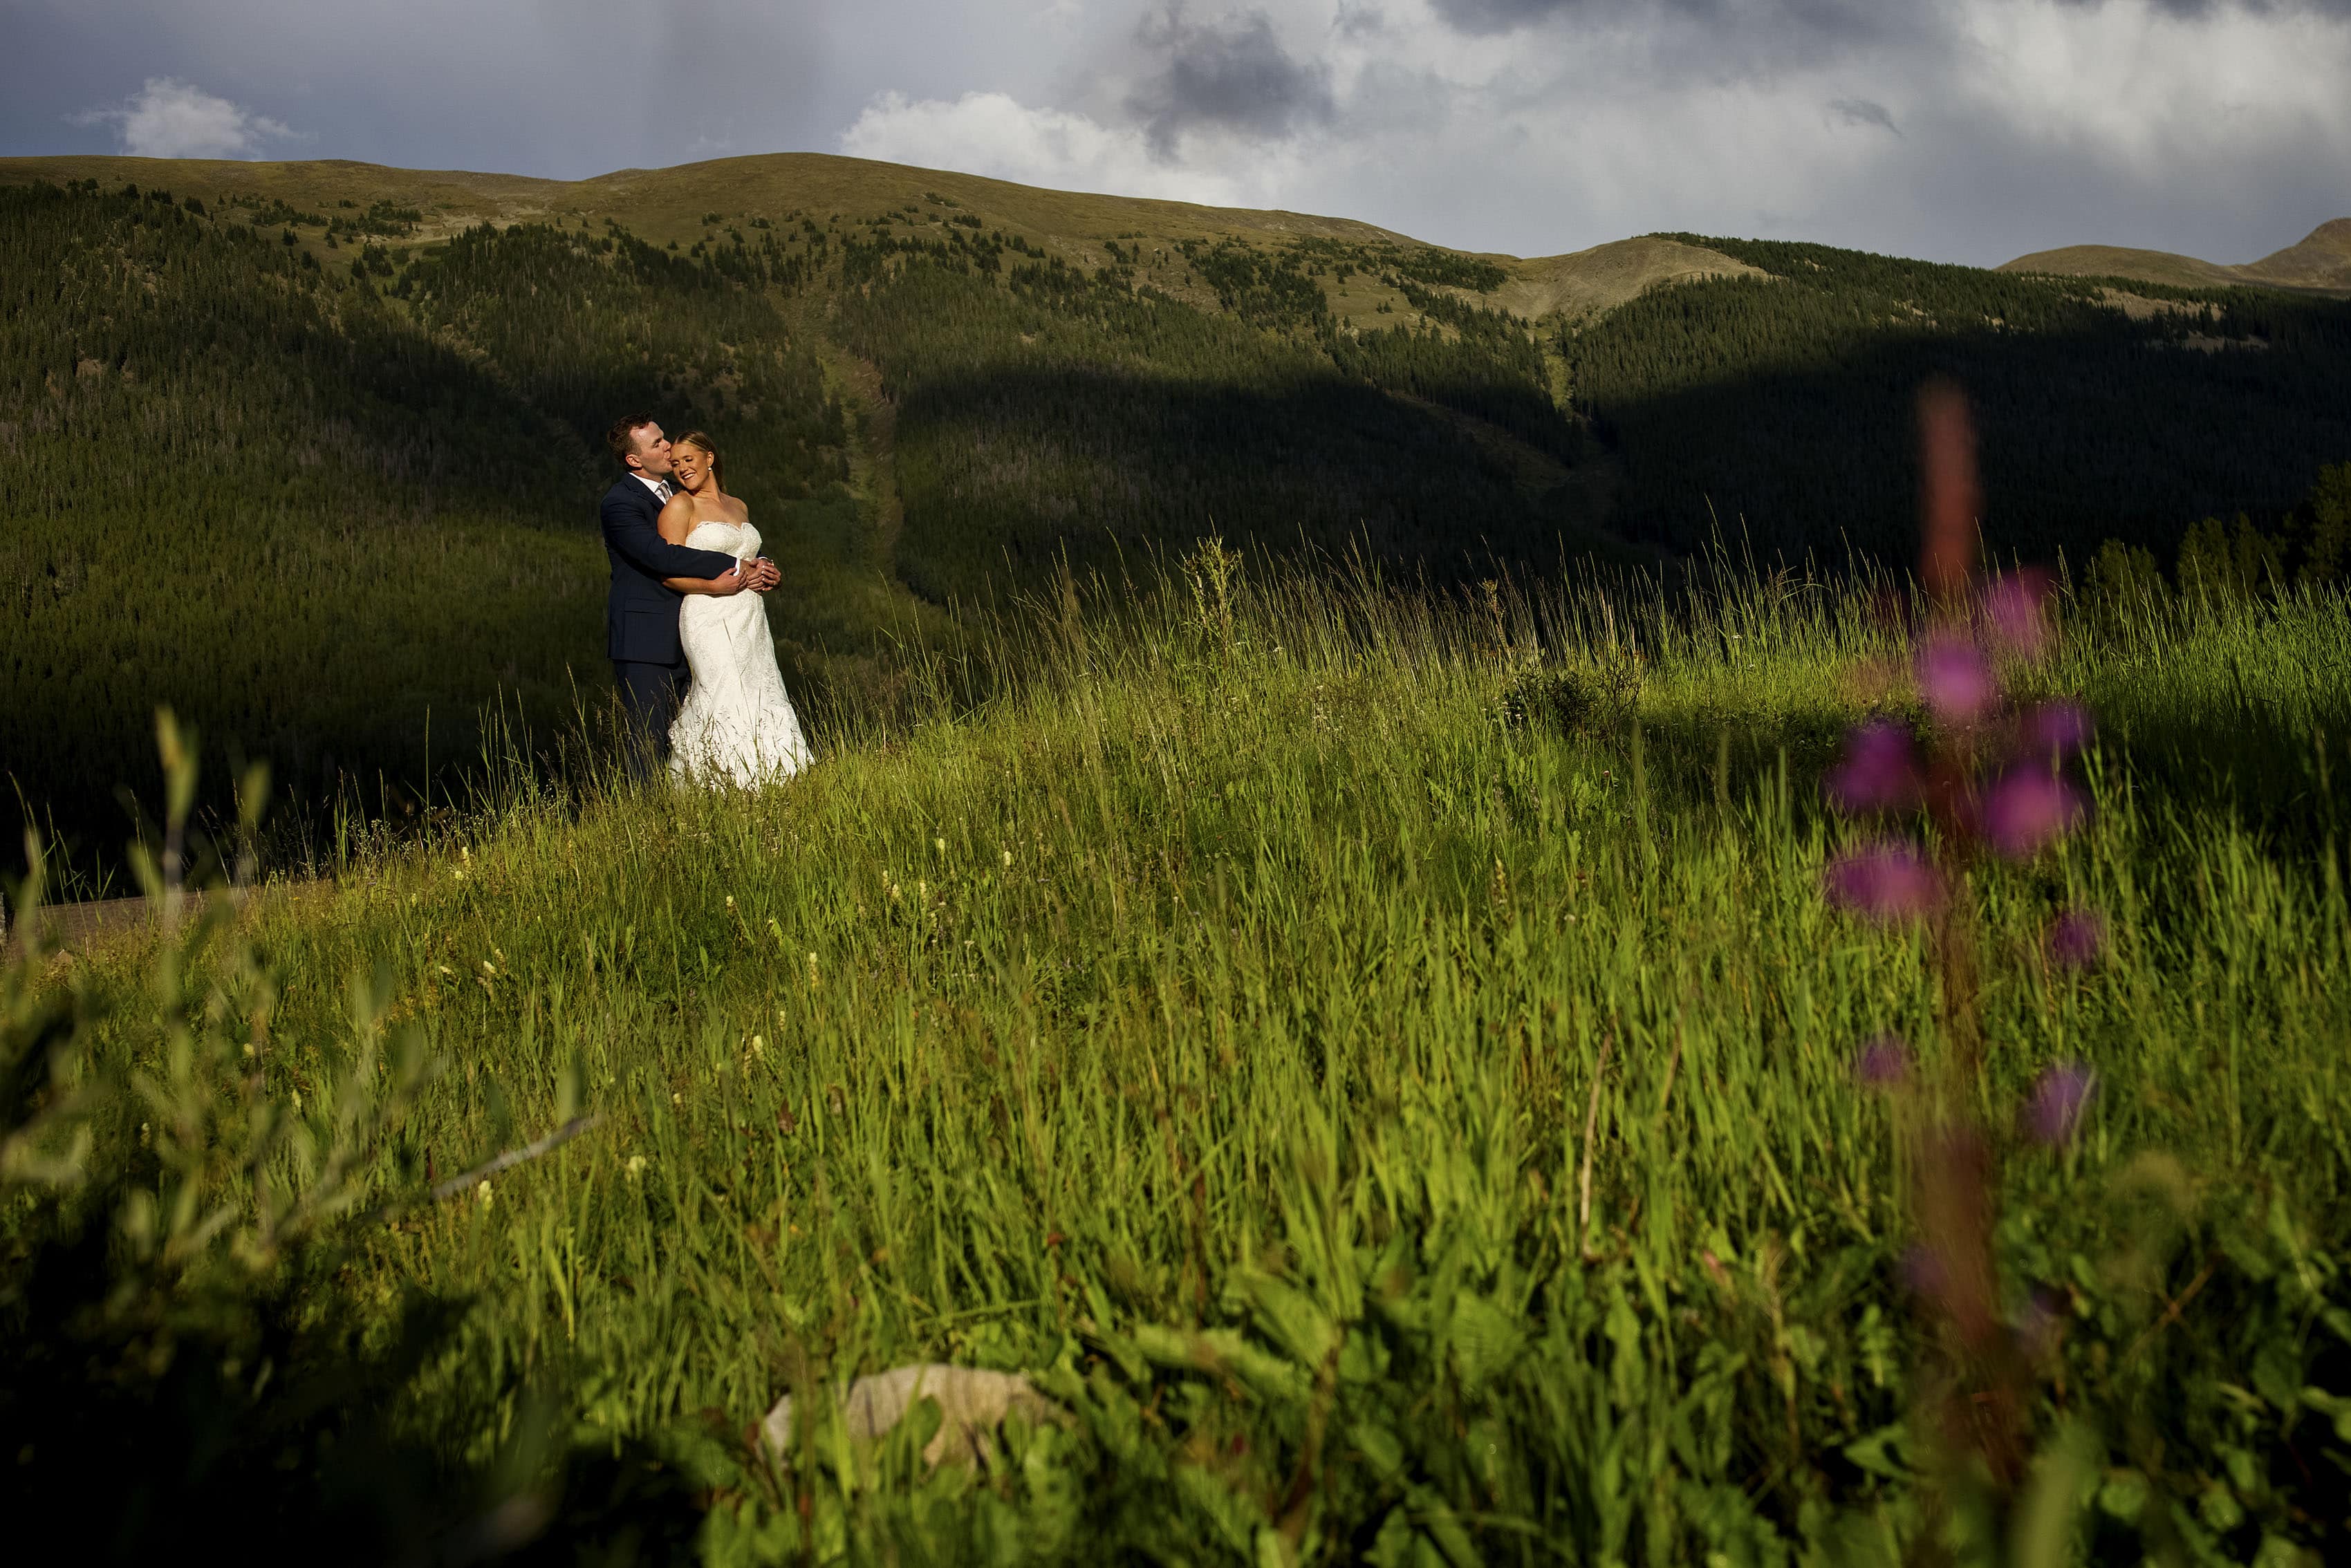 The groom kisses the bride on her forehead as they embrace on a hill near the Tenmile range during their Copper Mountain wedding